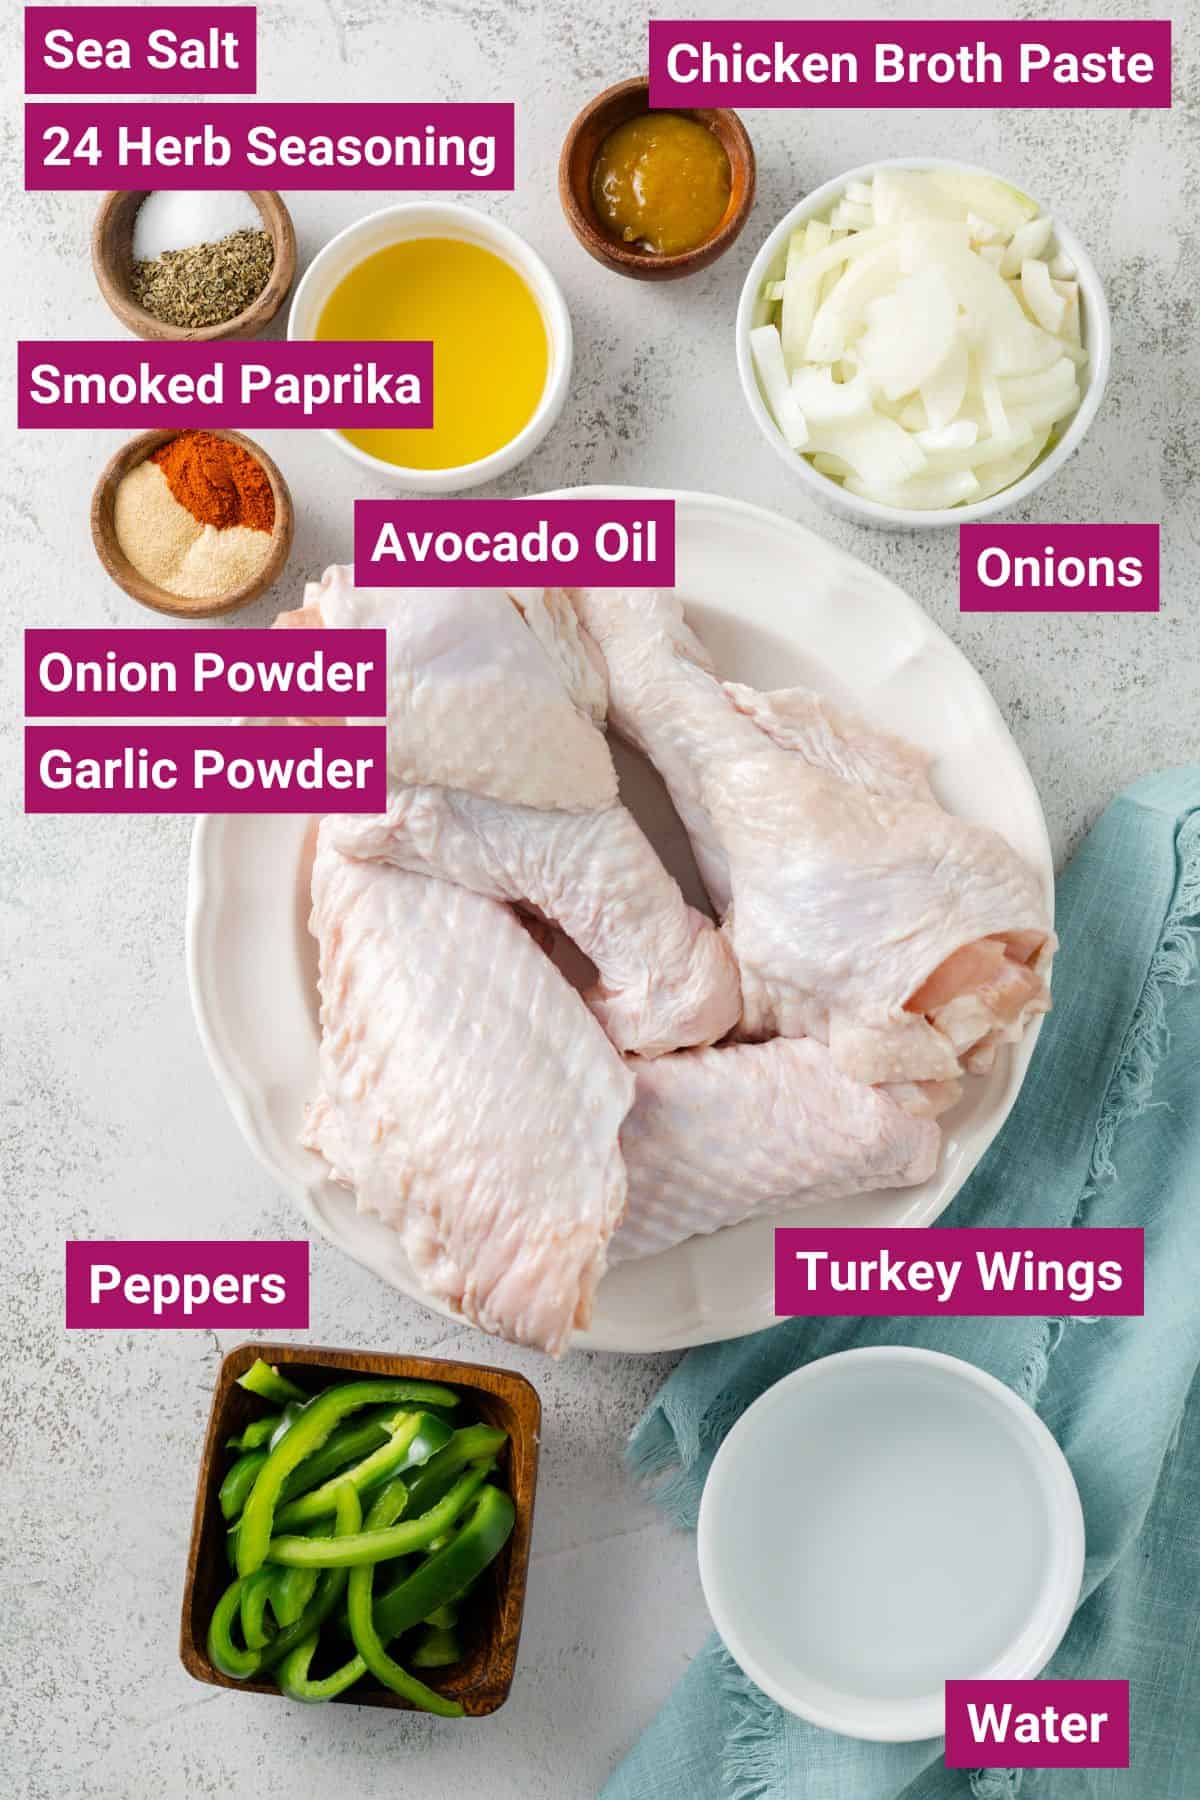 Overhead view of the labeled ingredients needed for baked turkey wings: a plate of turkey wings, a bowl of peppers, a bowl of onions, a bowl of water, a bowl of chicken broth paste, a bowl of avocado oil, a bowl of onion powder, garlic powder, and smoked paprika, and a bowl of sea salt and 24 herb seasoning